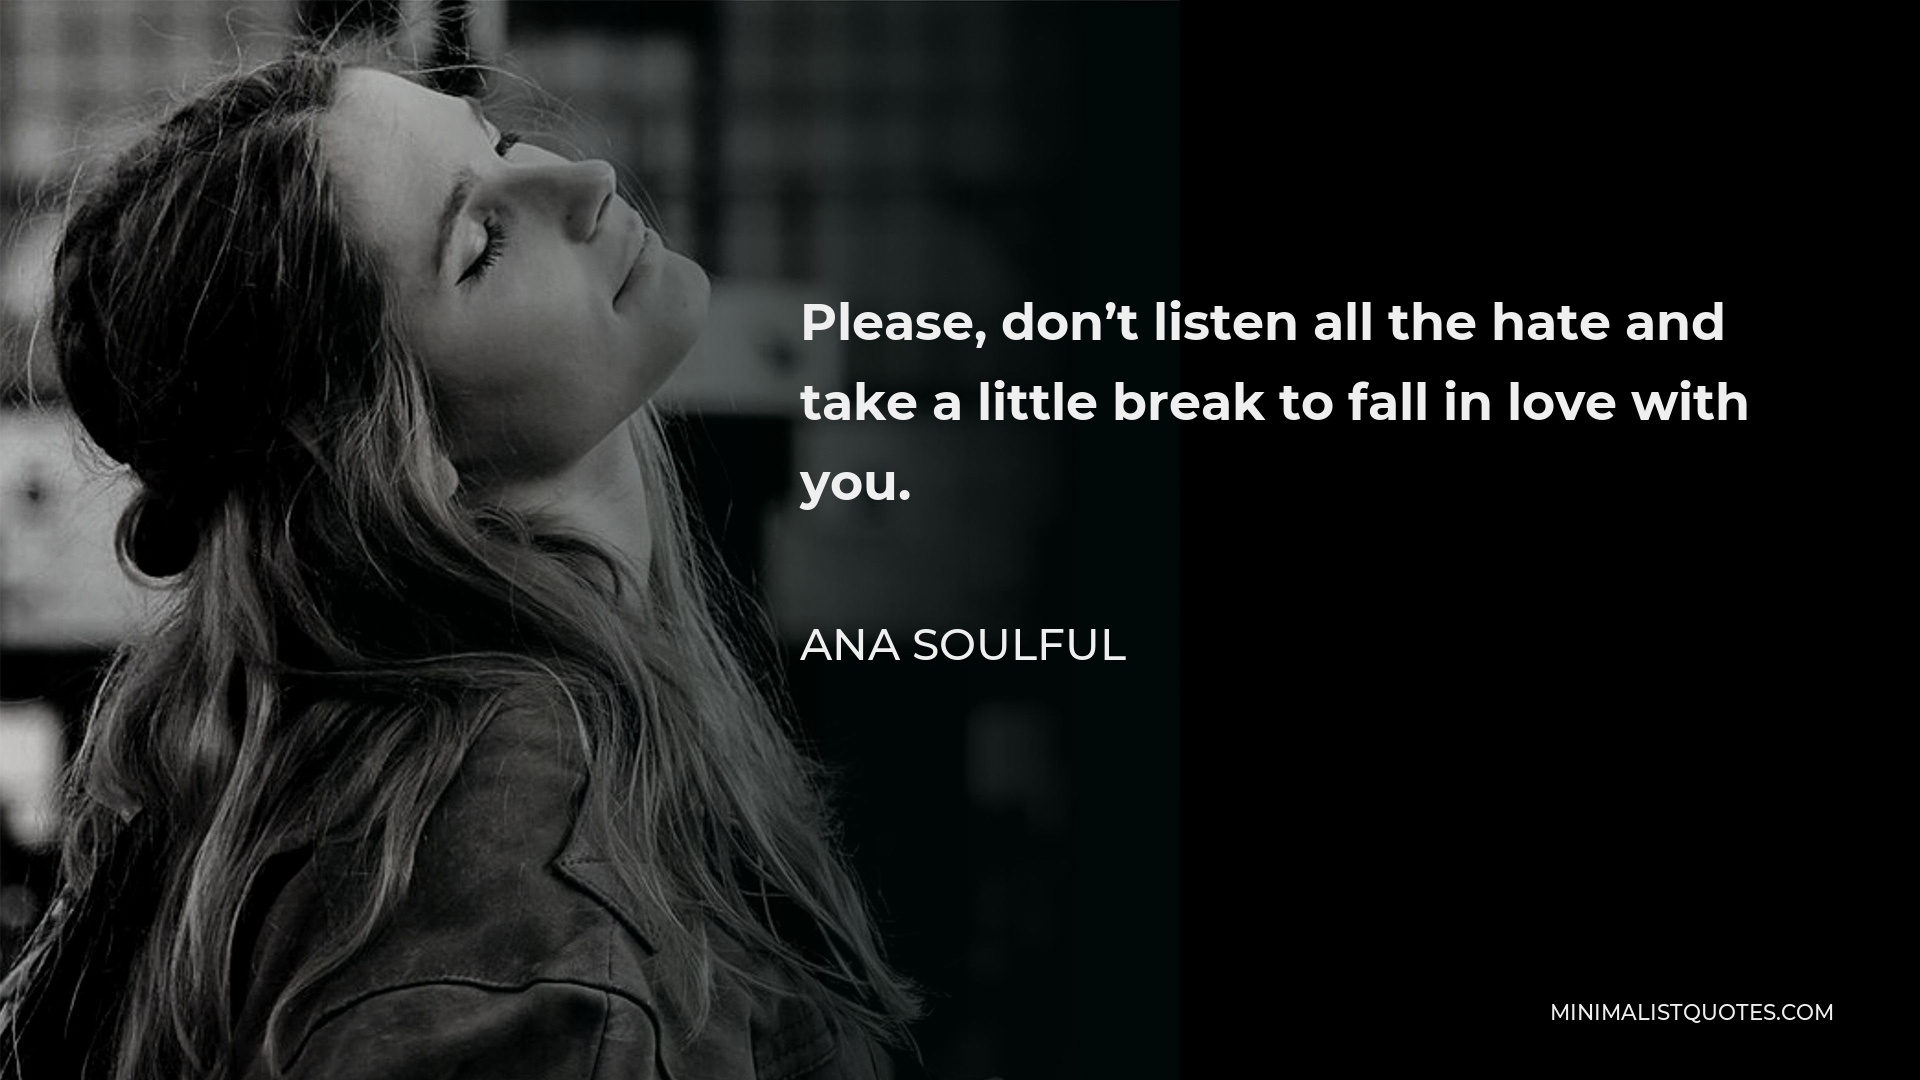 Ana Soulful Quote - Please, don’t listen all the hate and take a little break to fall in love with you.